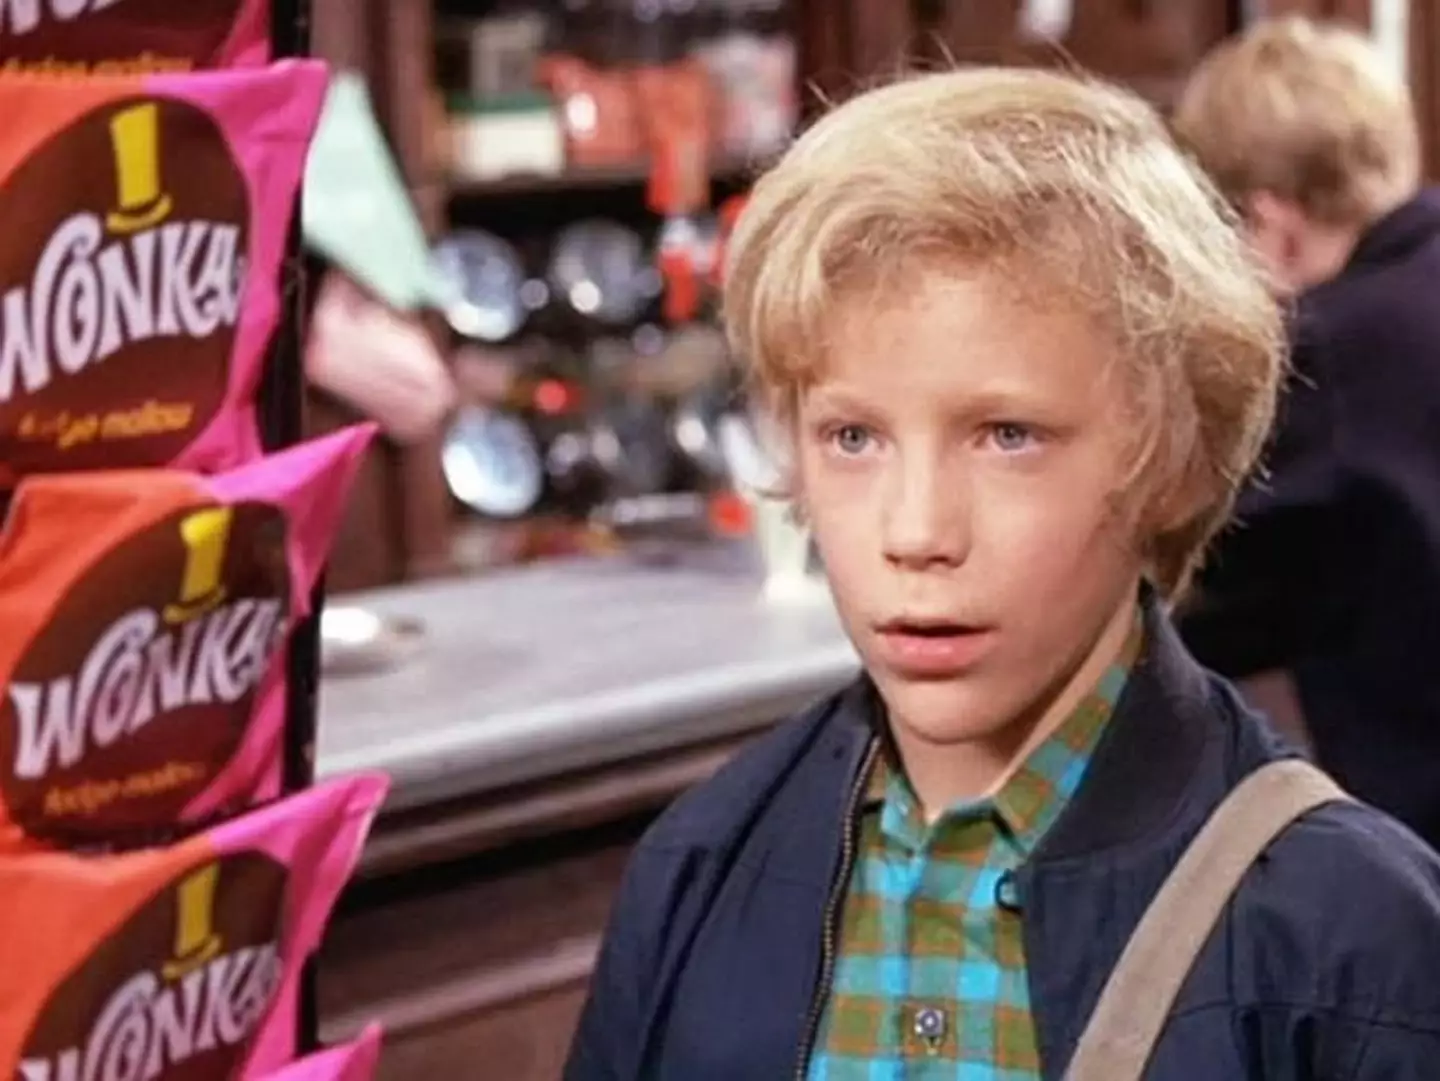 Peter Ostrum as a child in Willy Wonka and the Chocolate Factory.